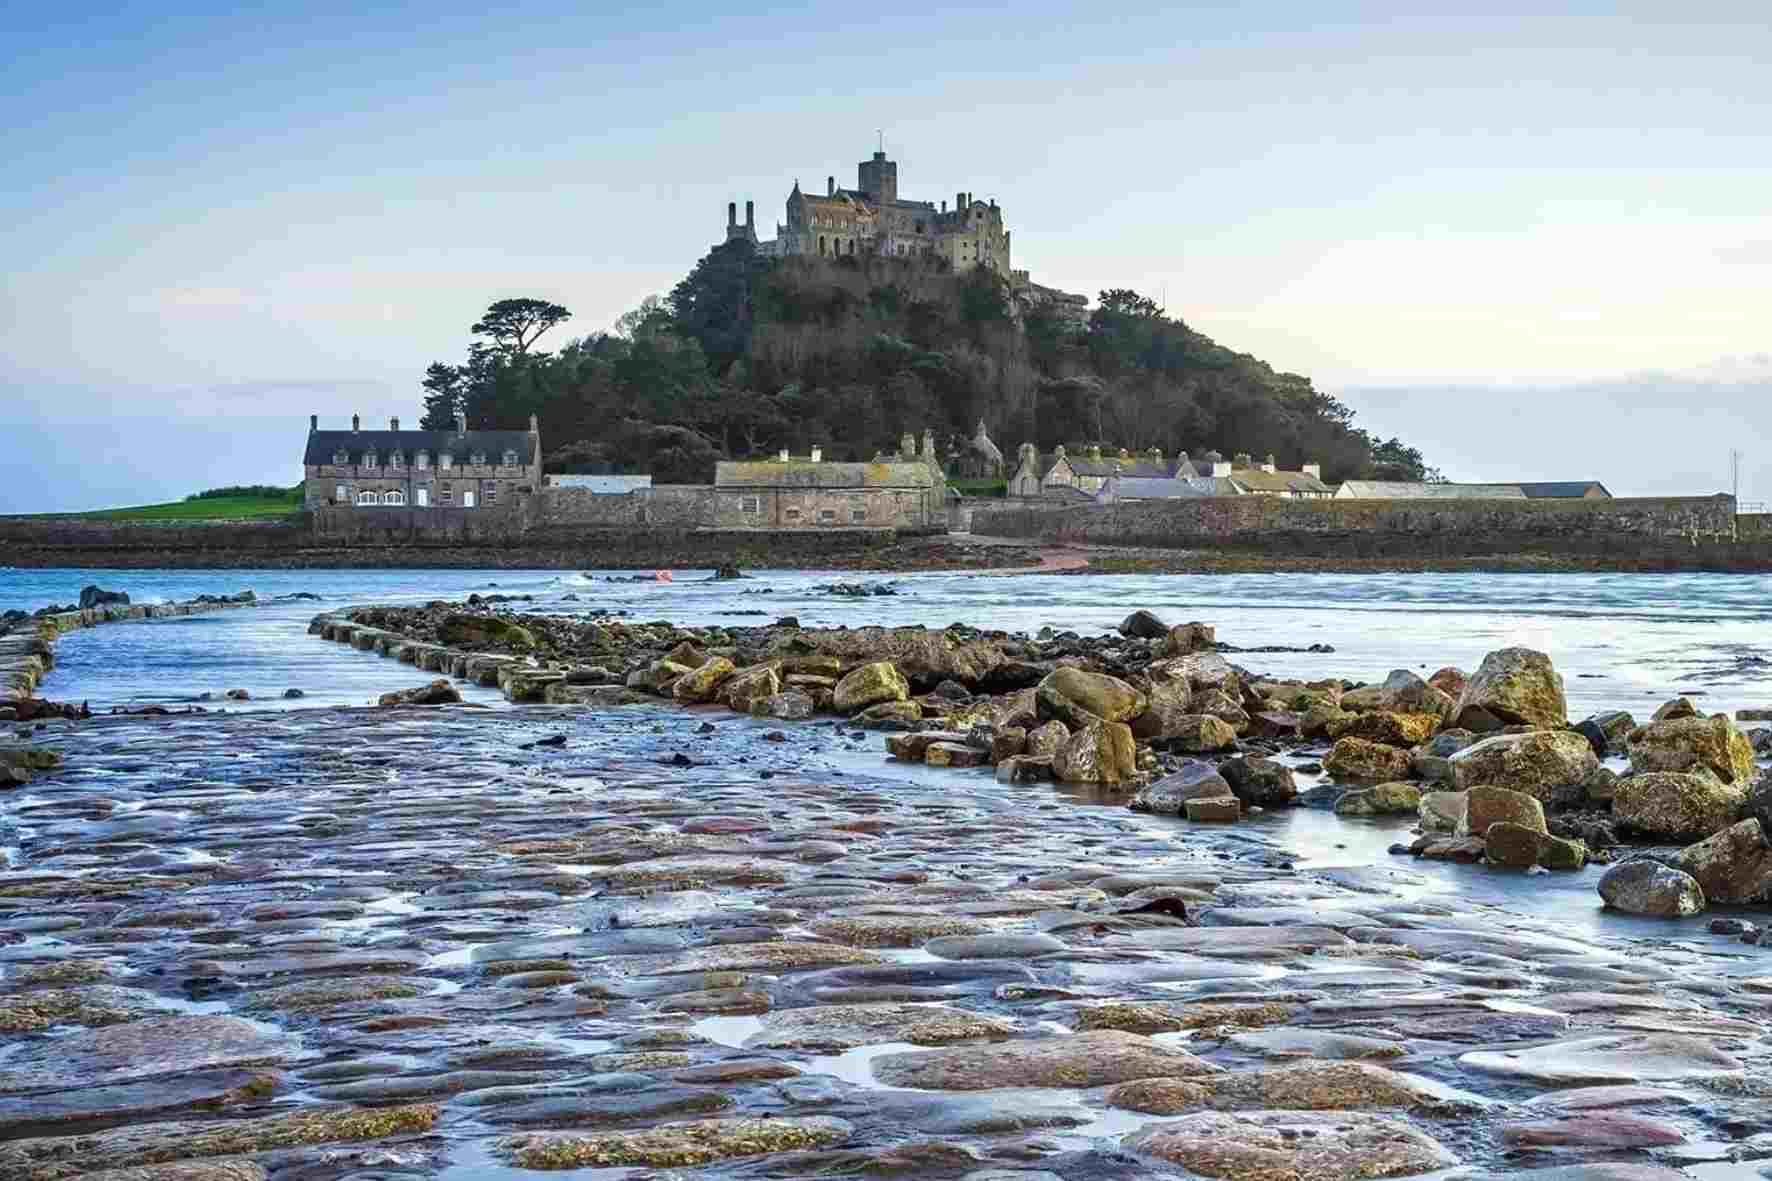 St Michael's Mount in the UK, a location used in House of the Dragon